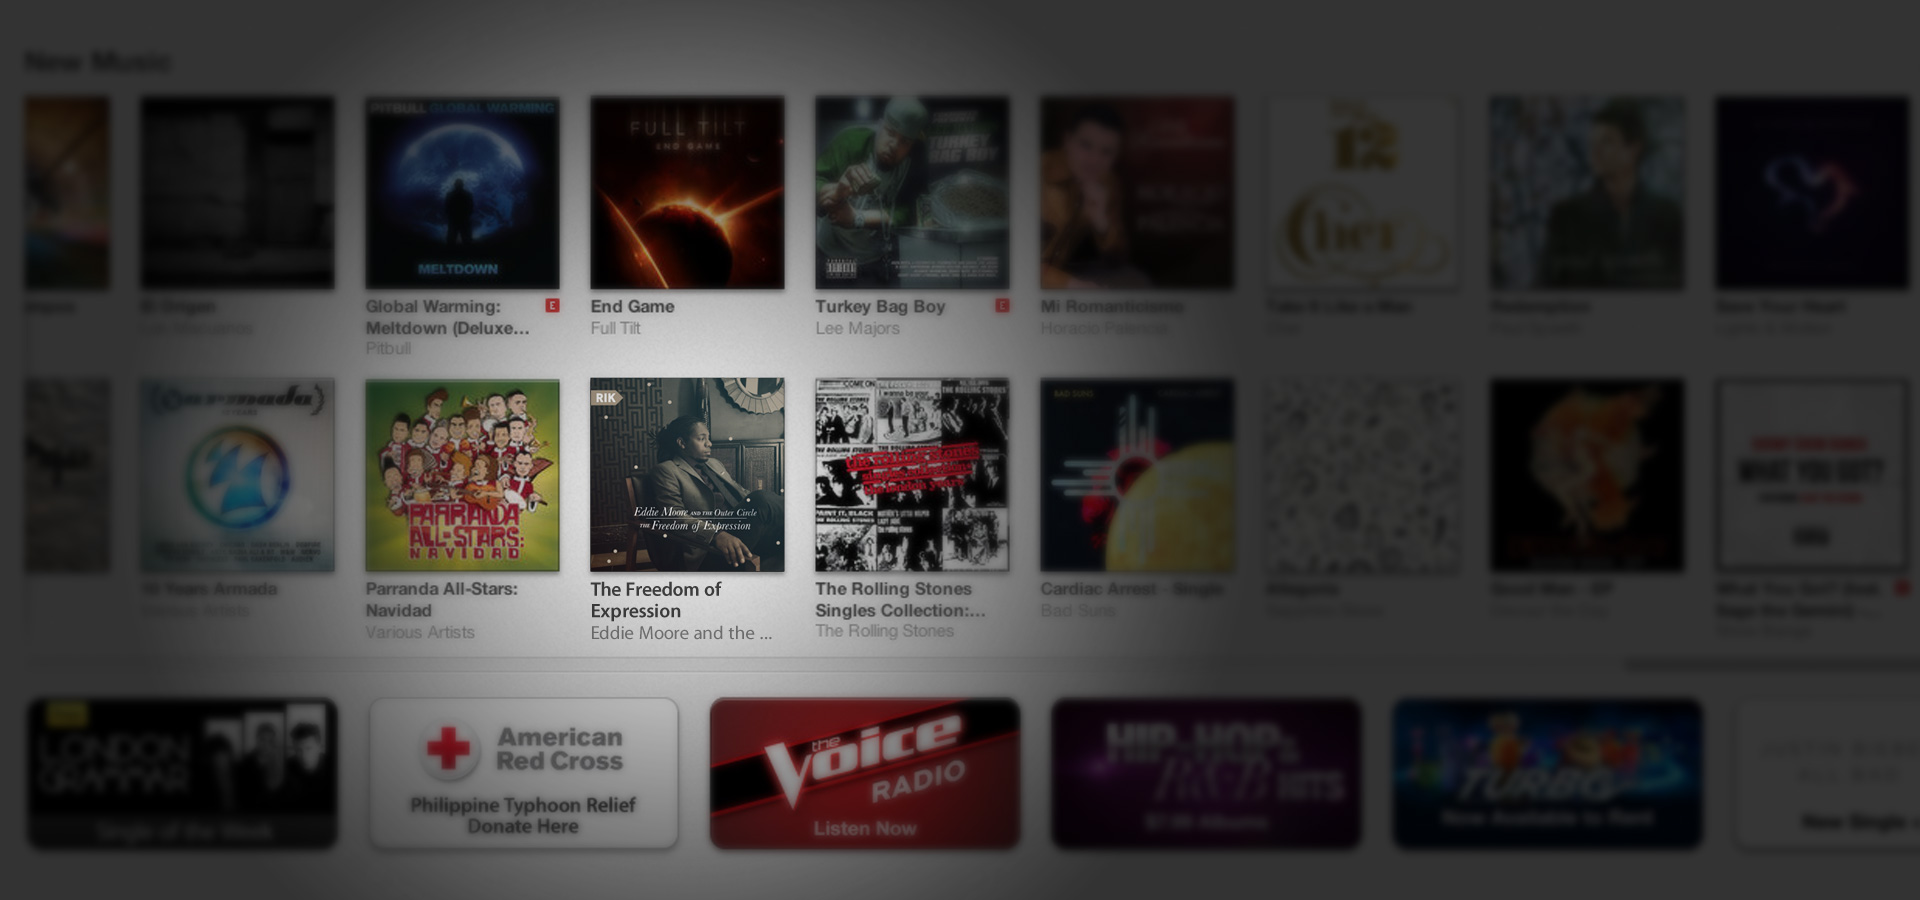 Eddie Moore and the Outer Circle <em>The Freedom of Expression</em> Featured on iTunes Homepage